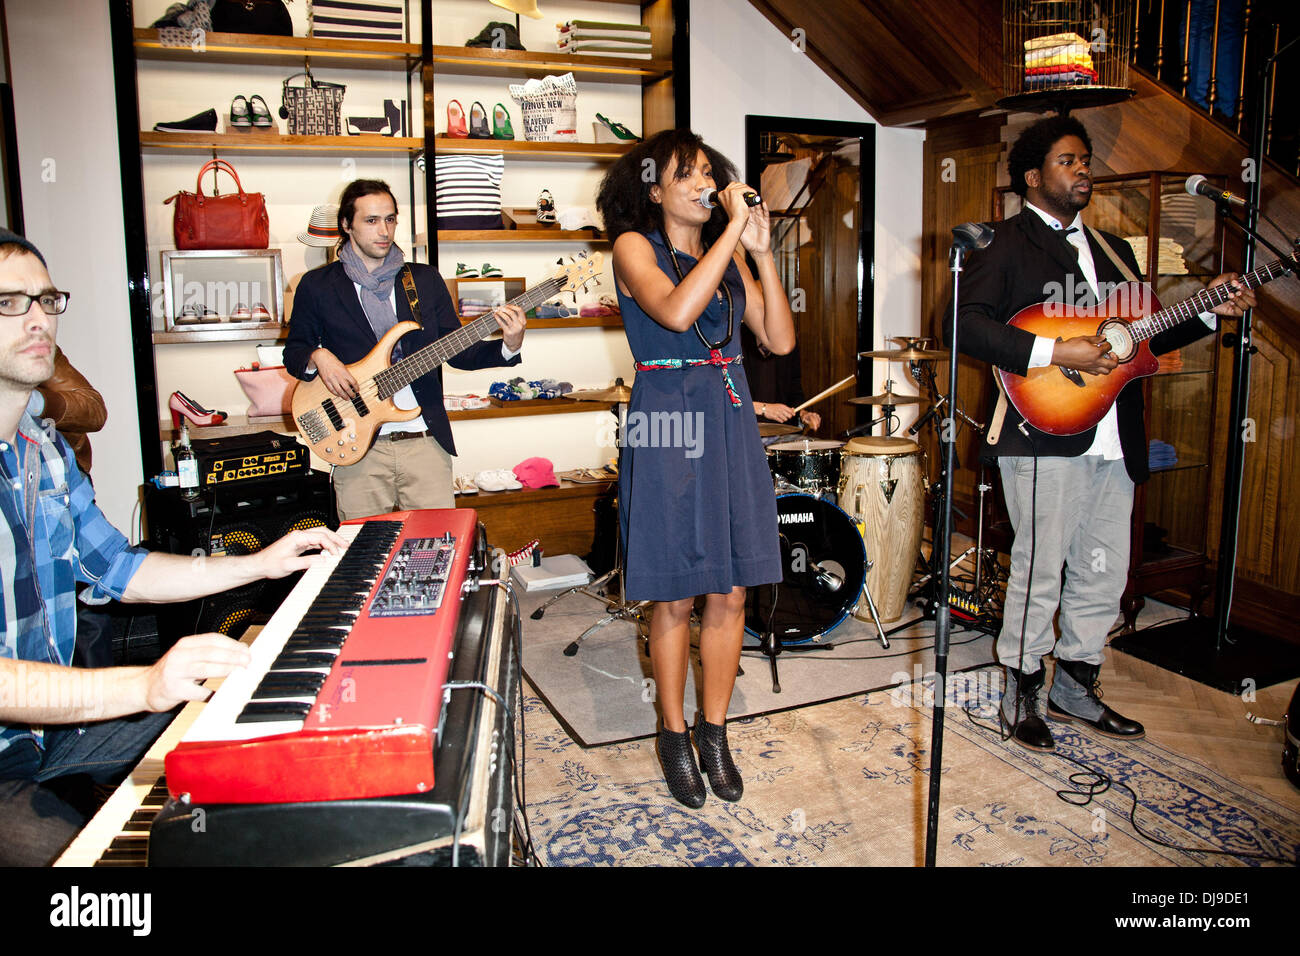 Y'Akoto attending Tommy Hilfiger Store Event 'The Promise' at Alte Post.  Hamburg, Germany - 18.04.2012 Stock Photo - Alamy